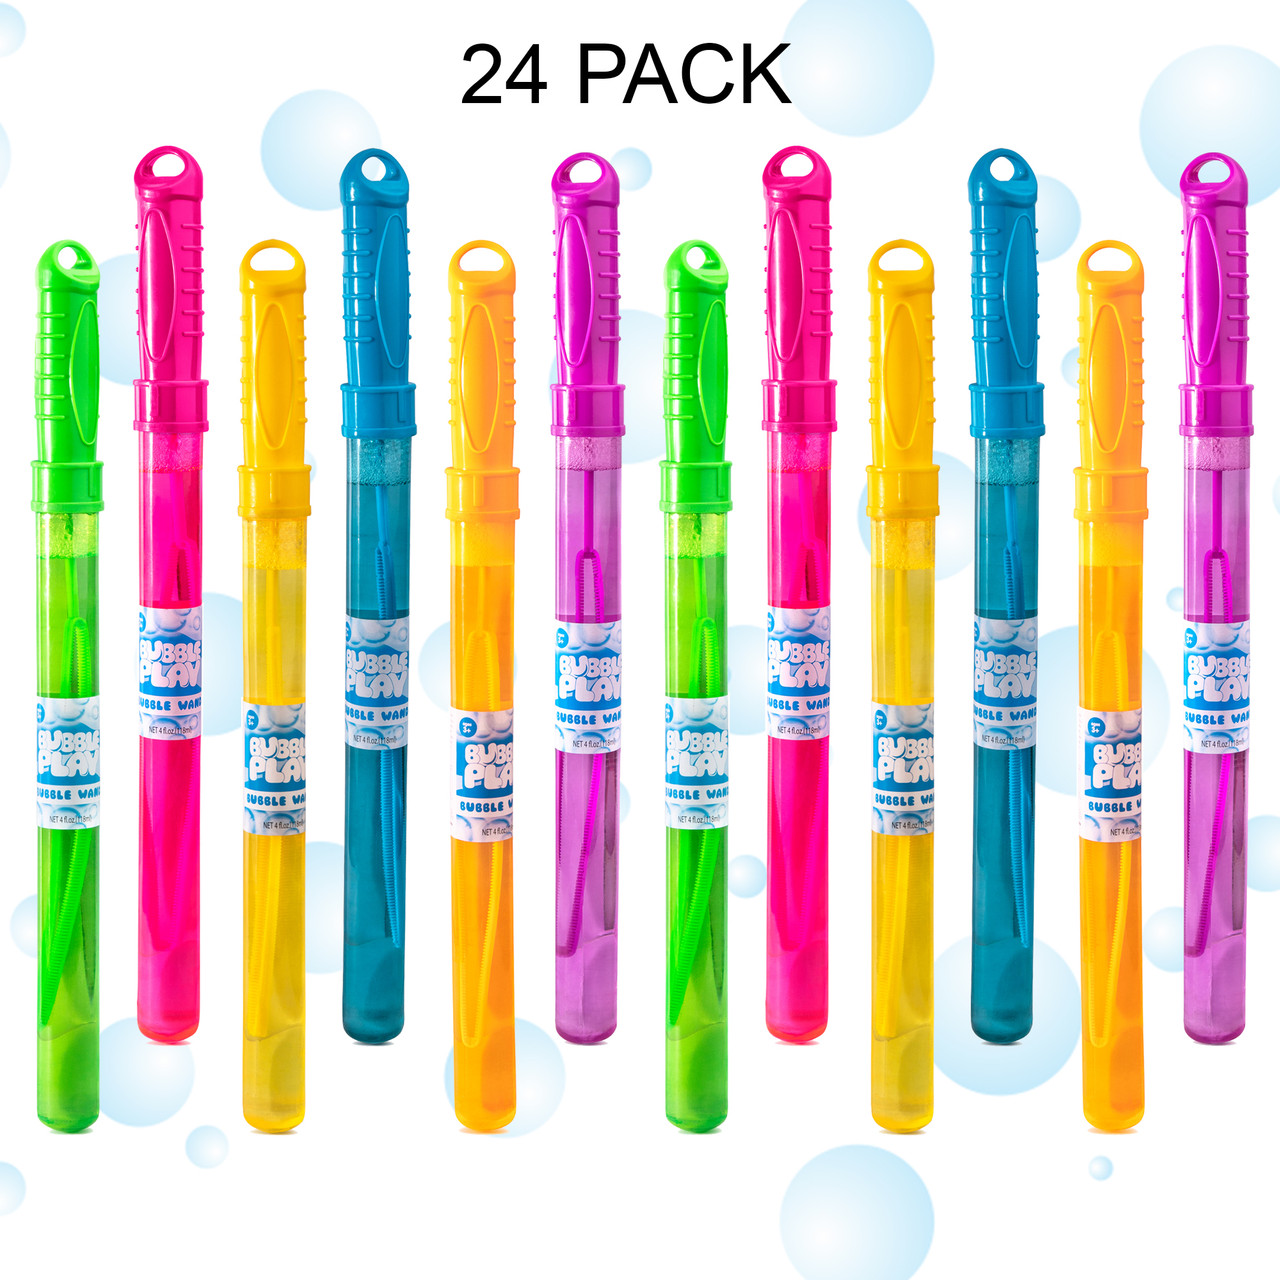 Ratatoys Crayon Bubble Wands for Kids Party Pack, 24 PC Set, 6 Assorted Colors with Long Dip Sticks and Non-Toxic Solution for Large Bubble Blowing